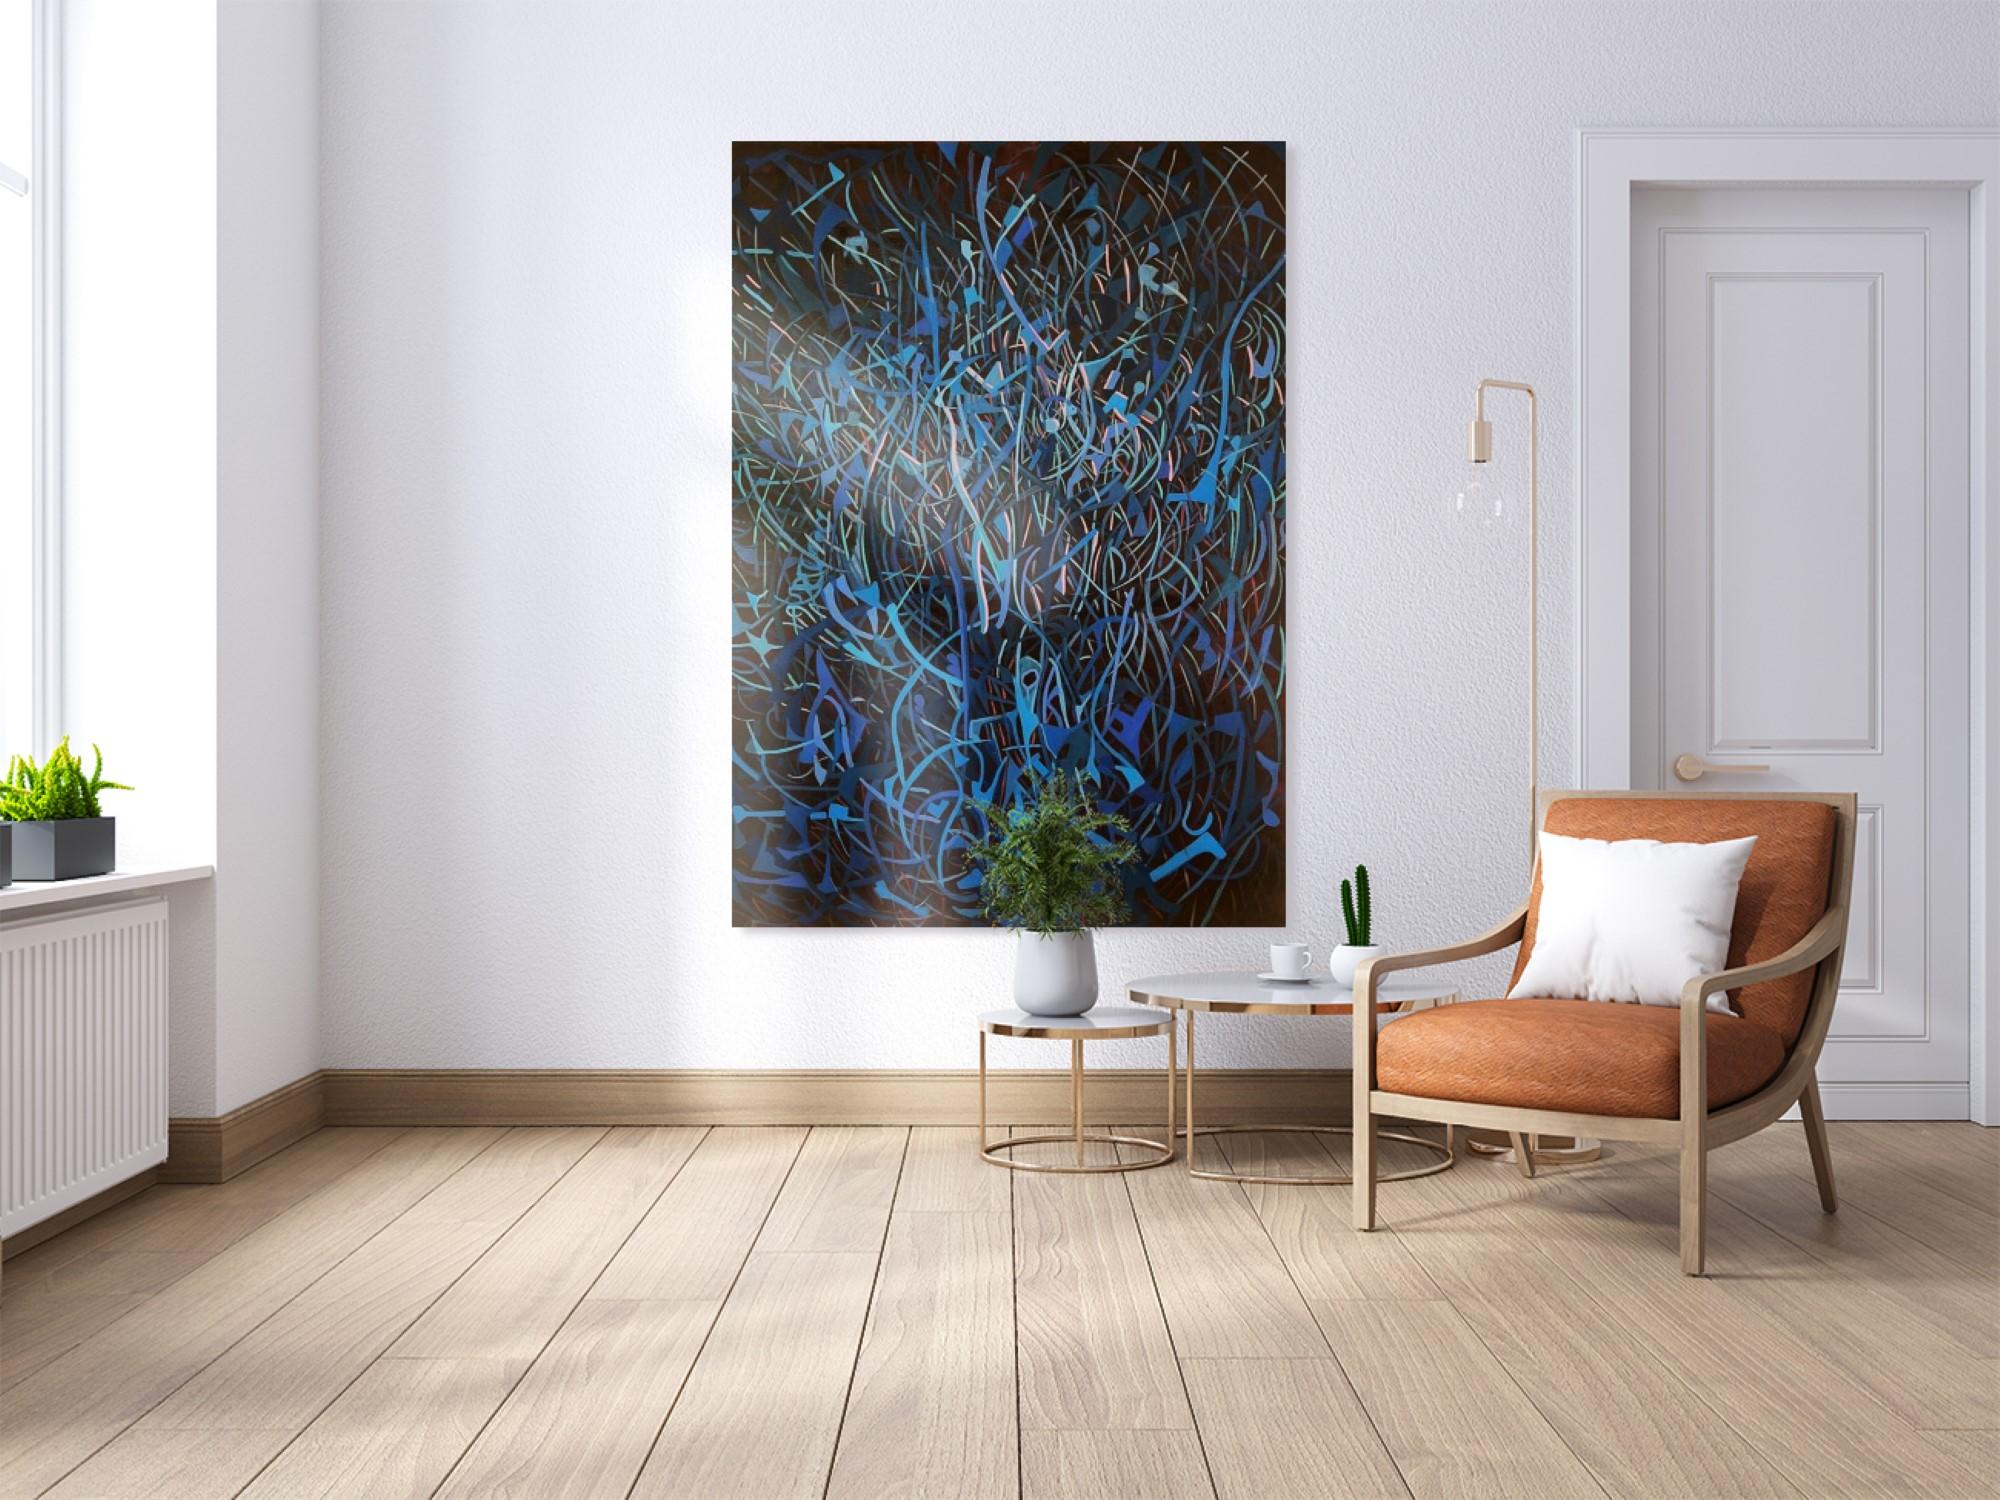 No digital pictures could justify the painting, It will transfer any space in your home or office to to  an art gallery. 
48x68 Roll Giclée Canvas Print
the original painting 72x 48x1.5 inches,  oil on canvas is sill available it could be purchased